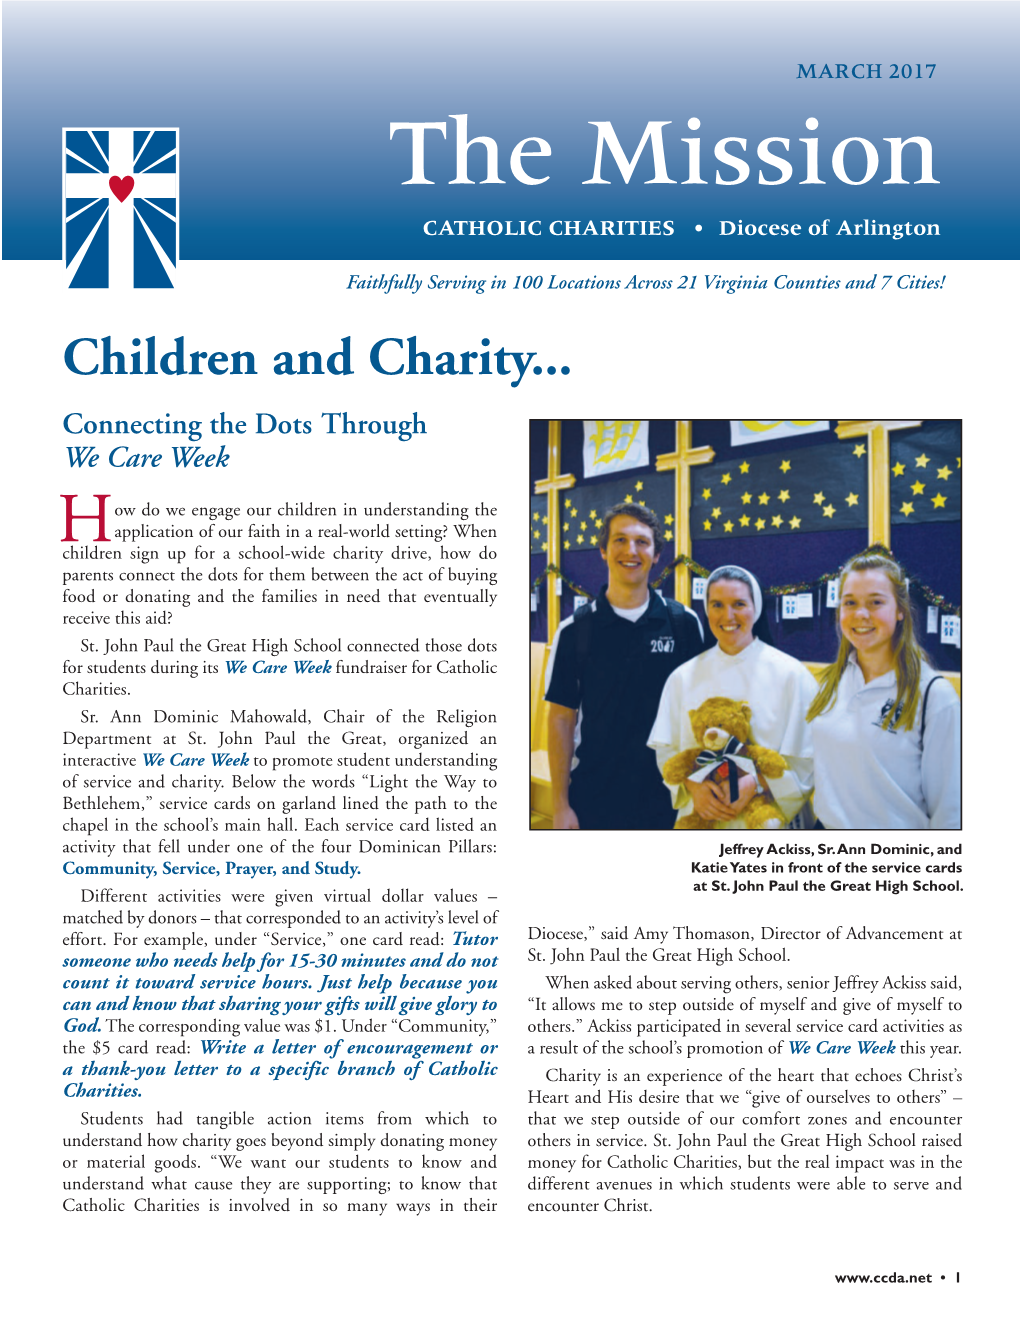 The Mission CATHOLIC CHARITIES • Diocese of Arlington